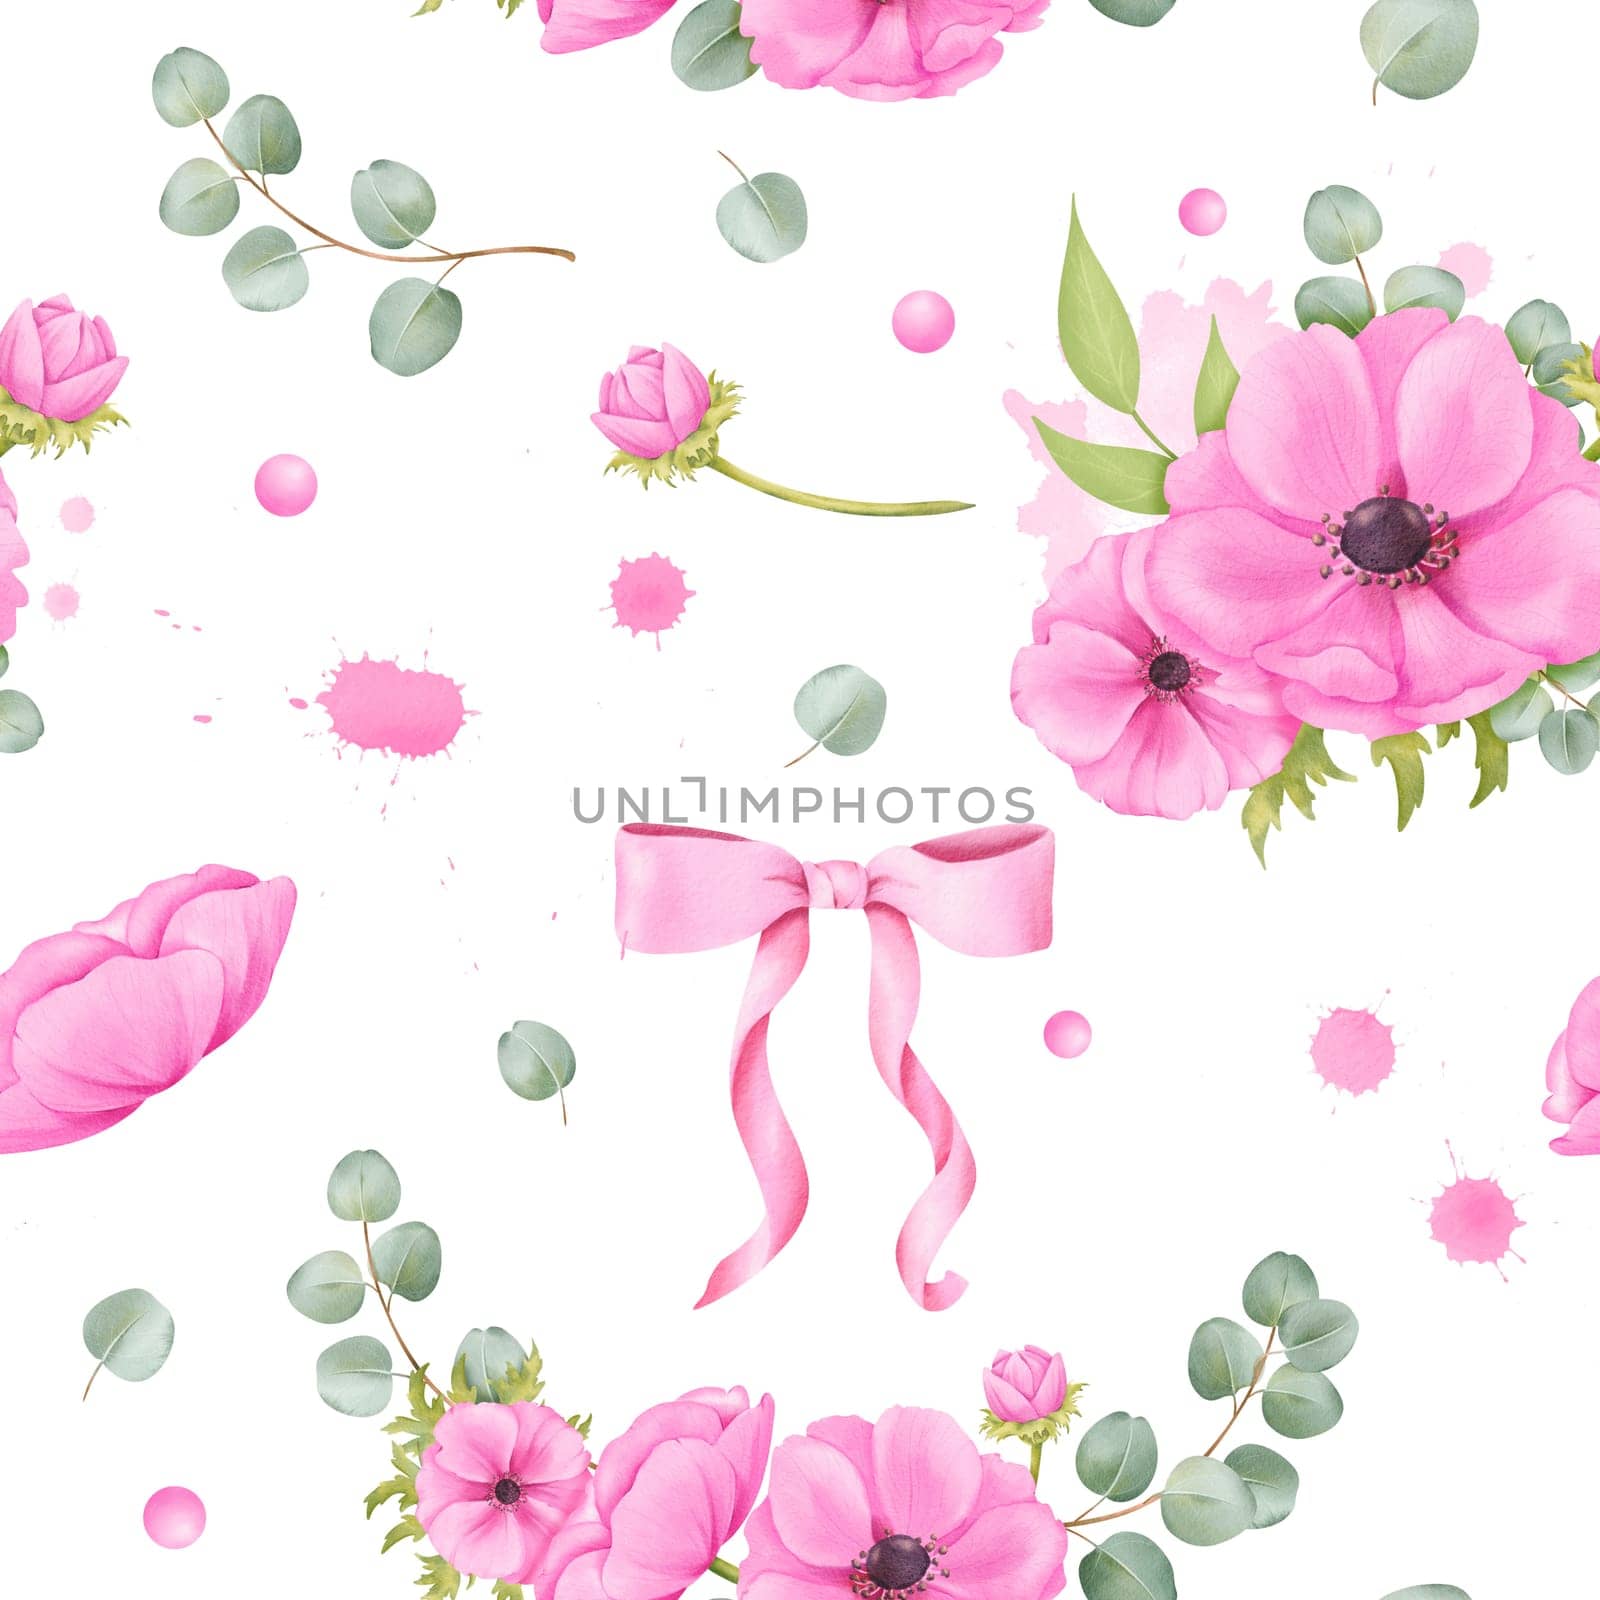 Seamless pattern featuring watercolor flower motifs. anemones, silk ribbons, eucalyptus leaves, and glittering rhinestones. for backdrop designs, wallpapers, textile patterns, DIY crafts.